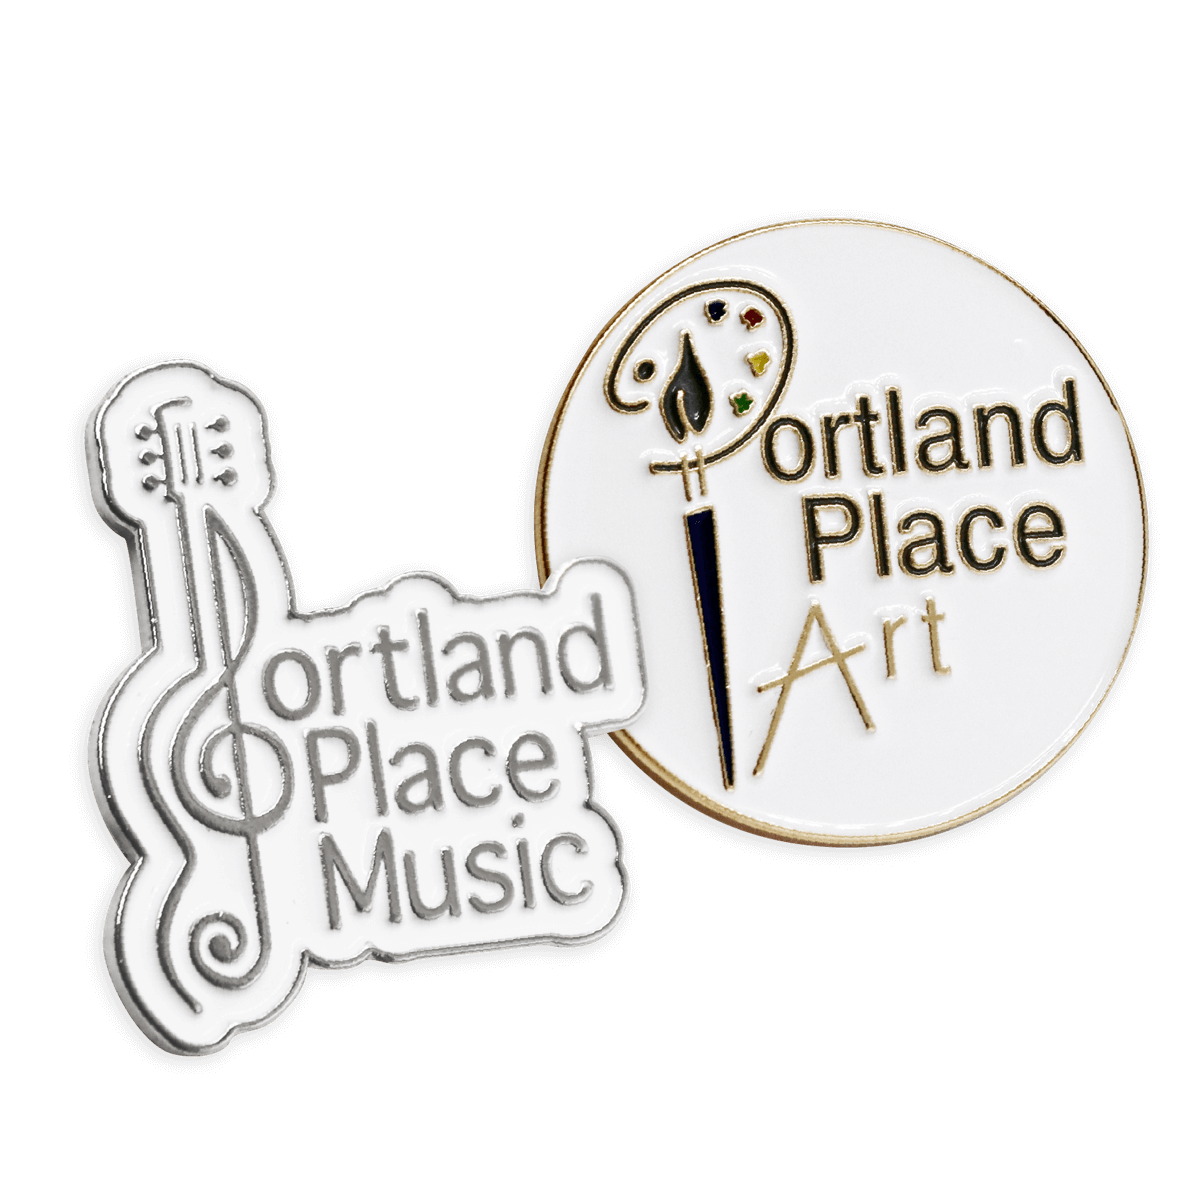 Two badges for Portland Place